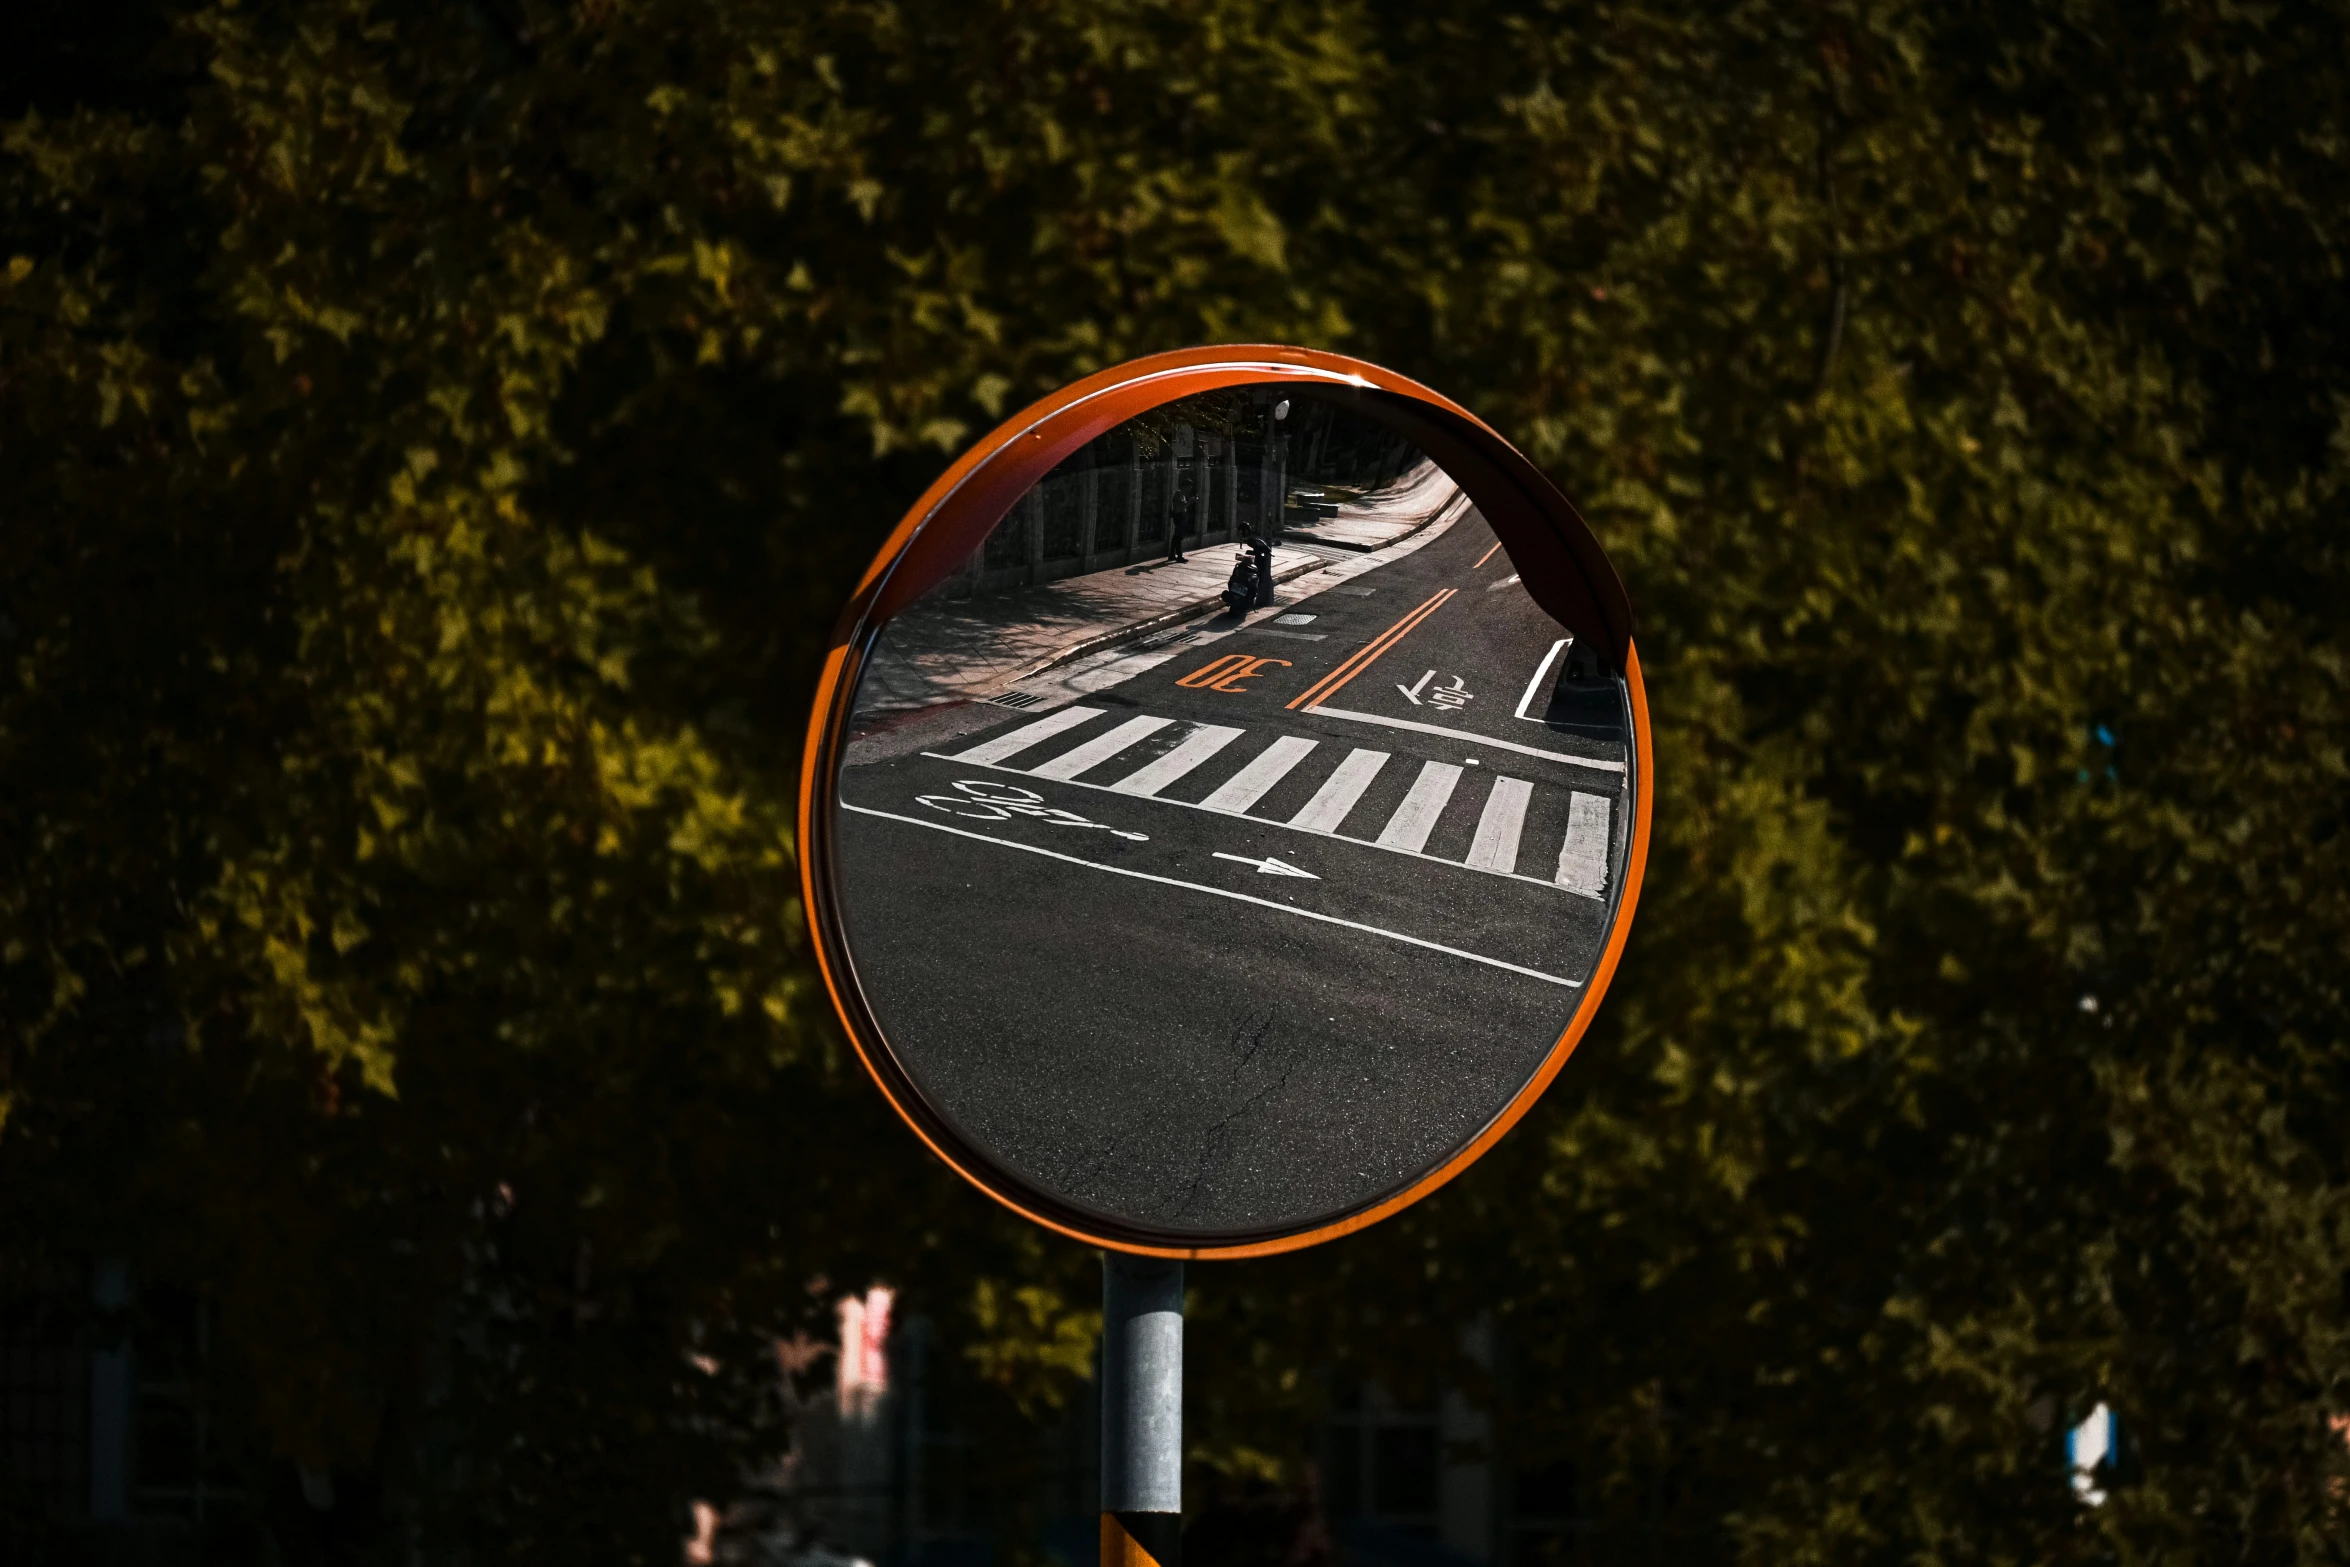 a circular mirror reflecting street lights in the background